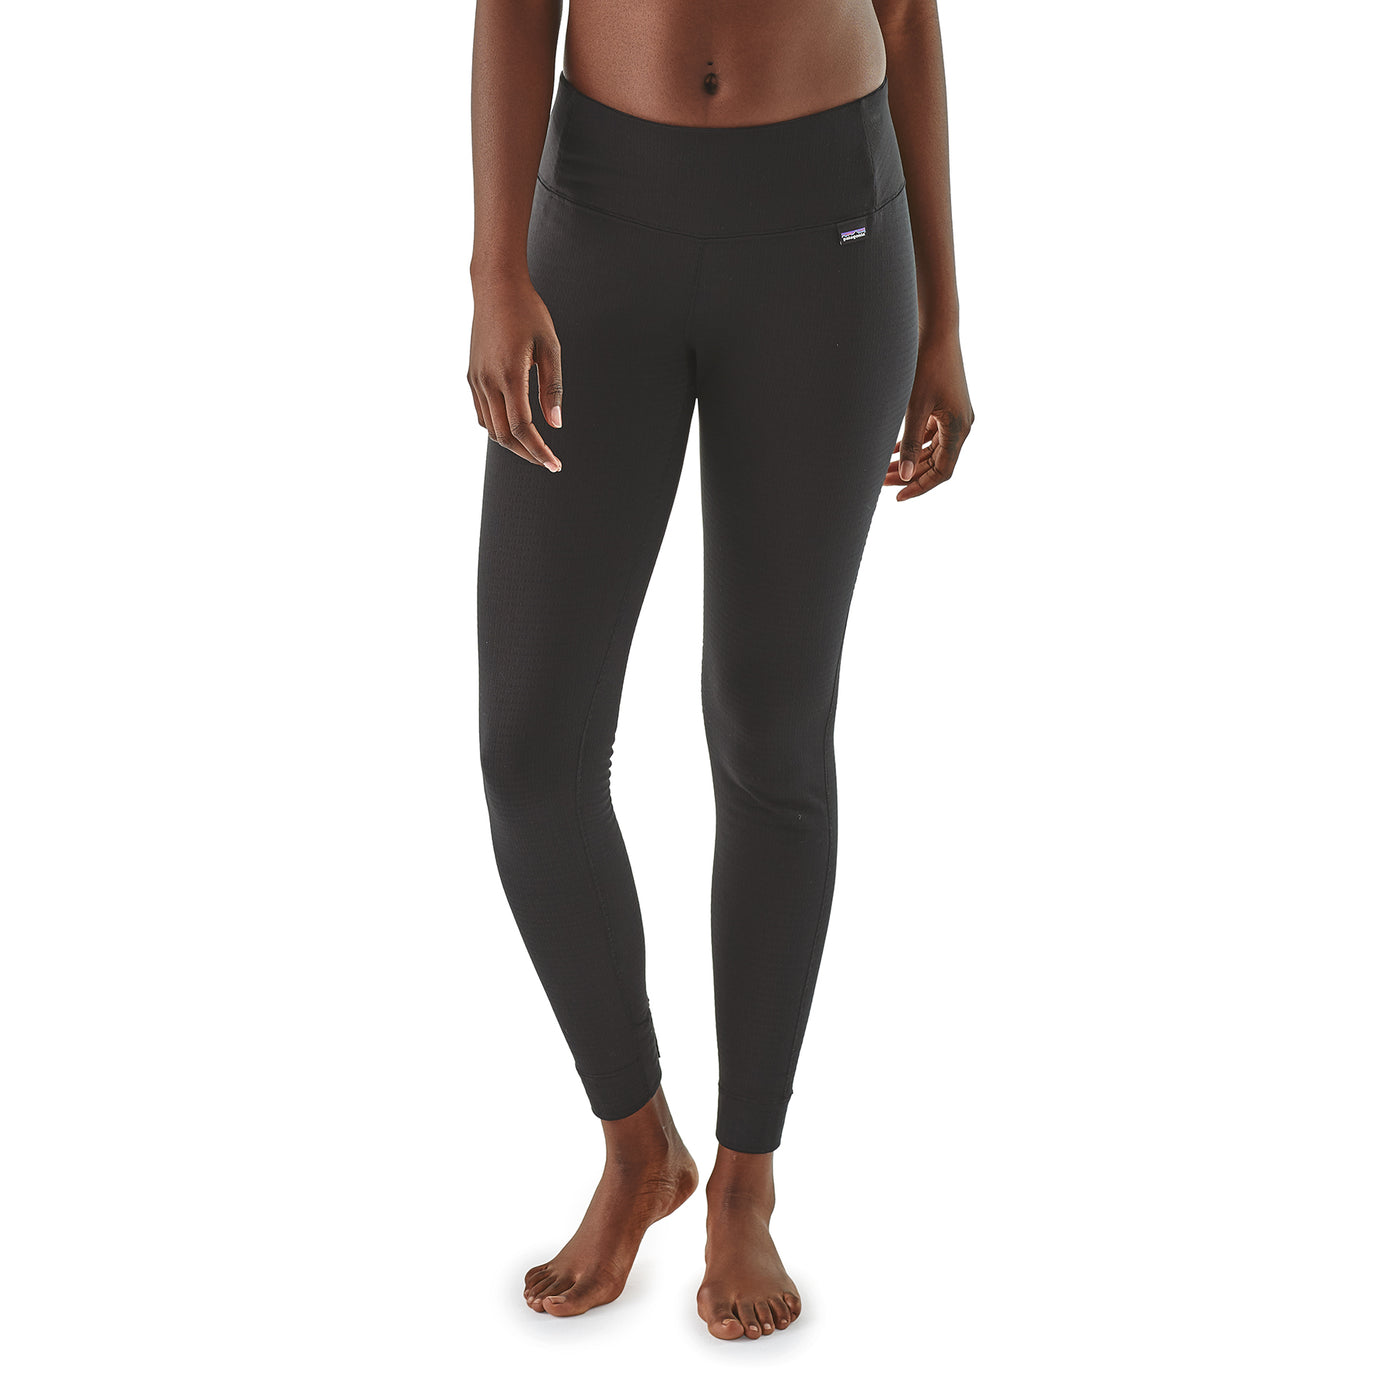 PATAGONIA Women's Capilene Thermal Weight Bottoms